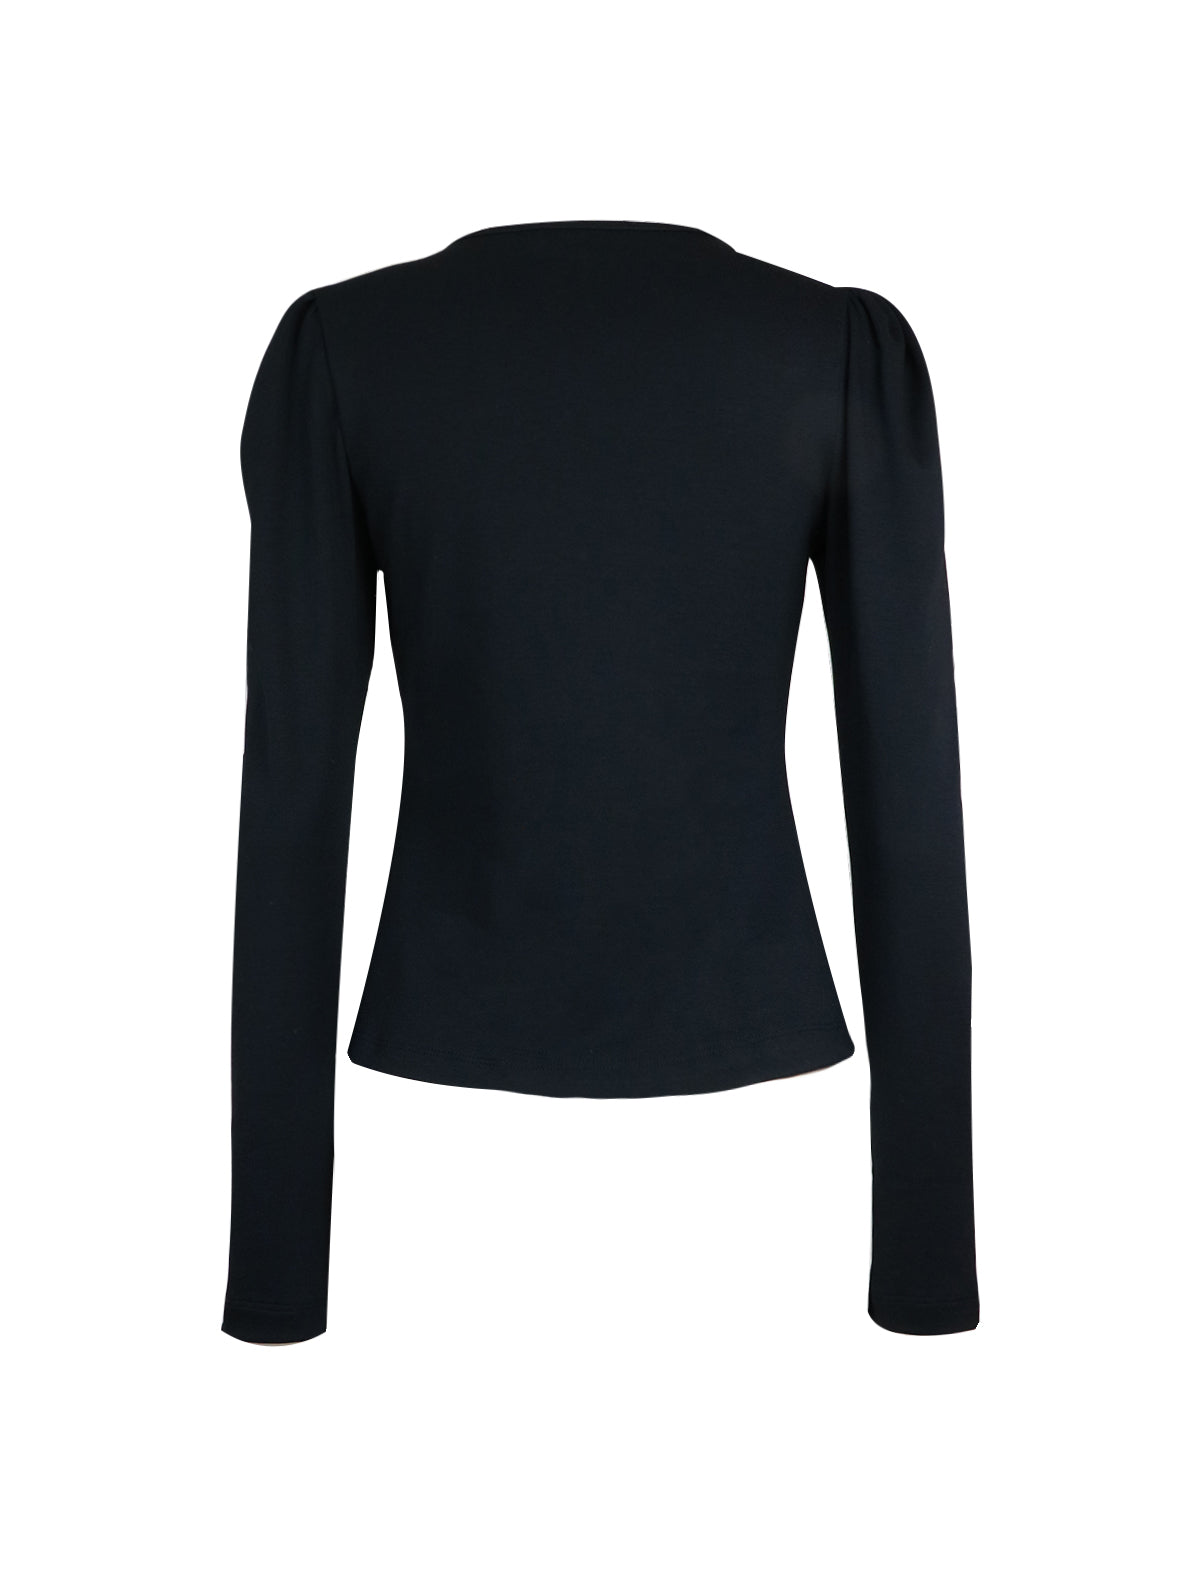 BEAUFILLE Maier Blouse in Black